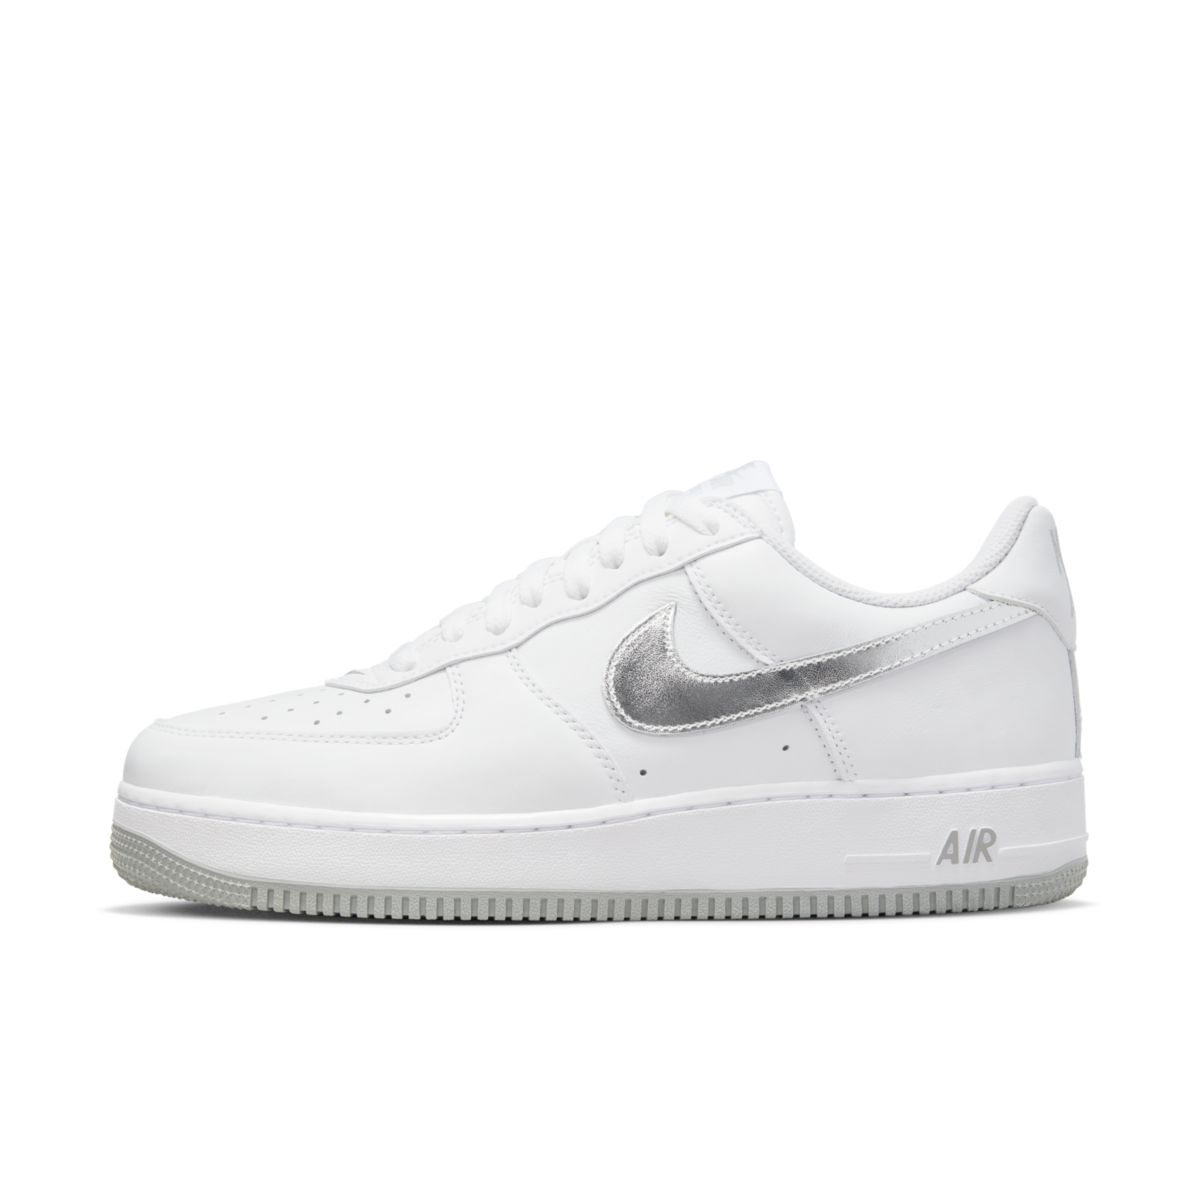 Nike Air Force 1 Low Metallic Silver Color of the Month DZ6755-100 2